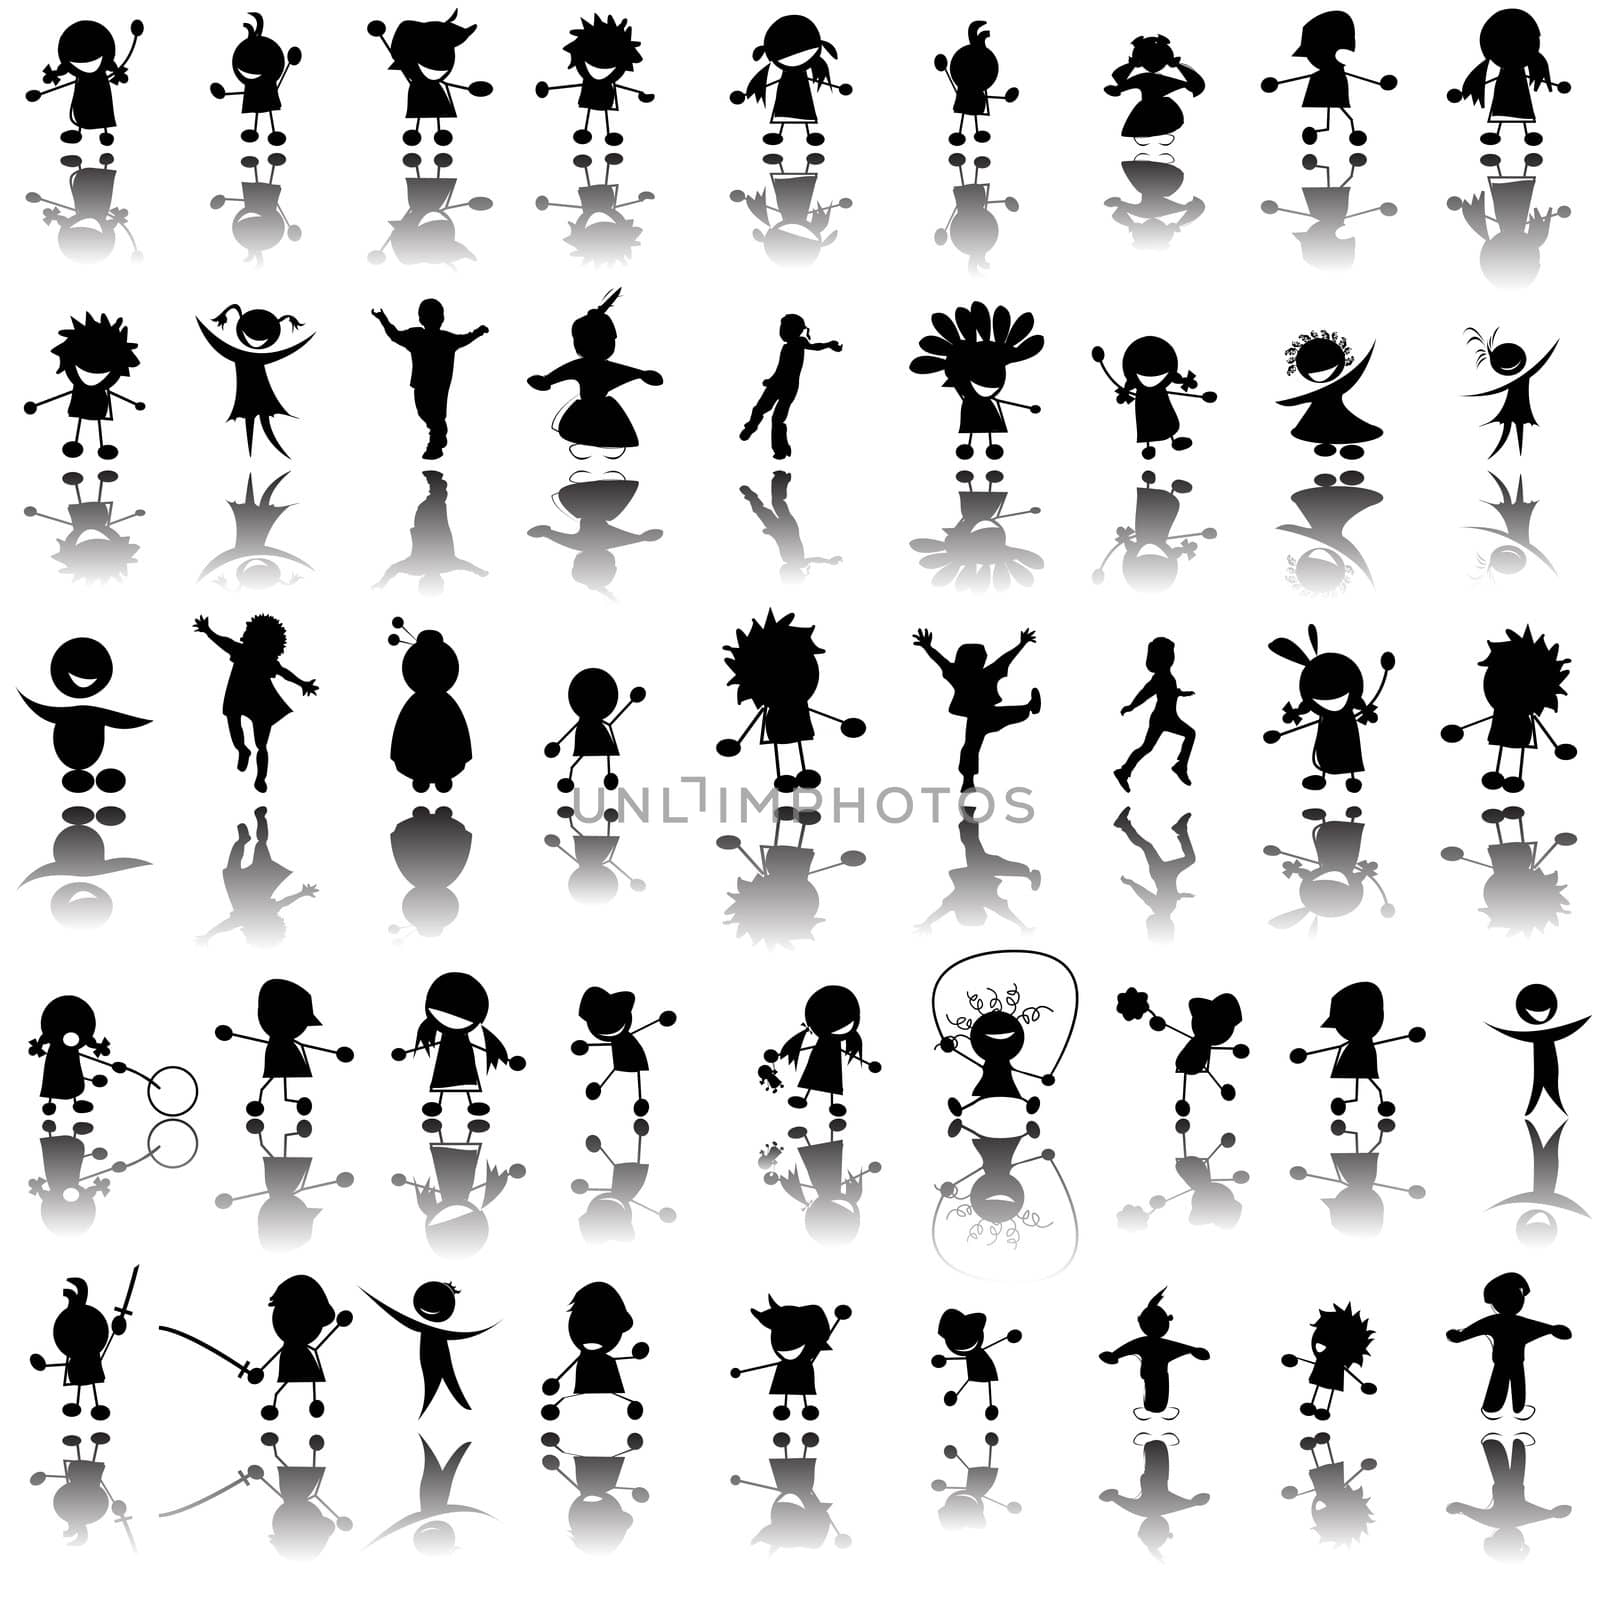 Hand drawn children silhouettes, icons